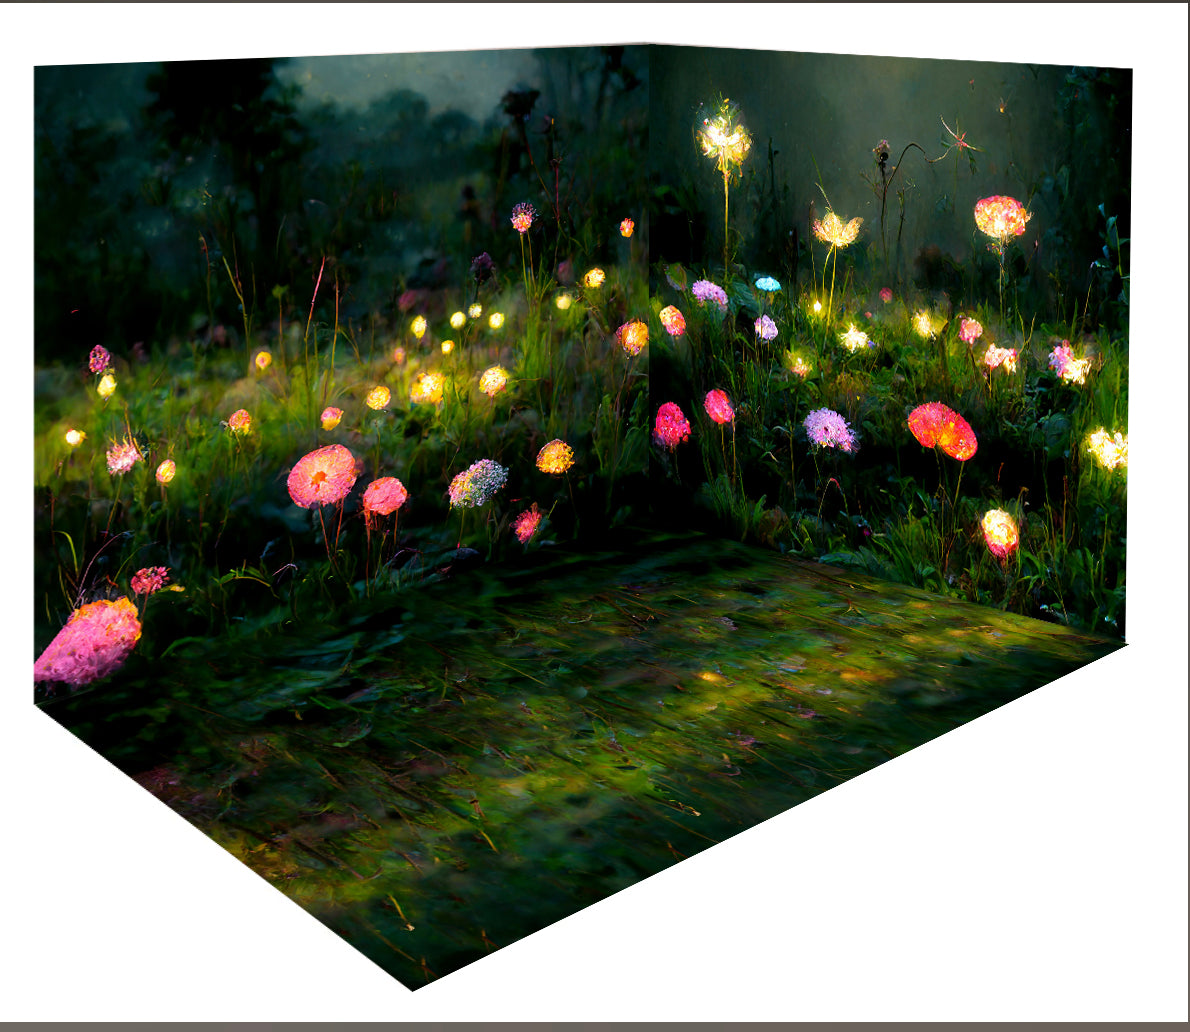 Kate Fairy Garden Whimsy Floor Backdrop Designed By Pine Park Collection